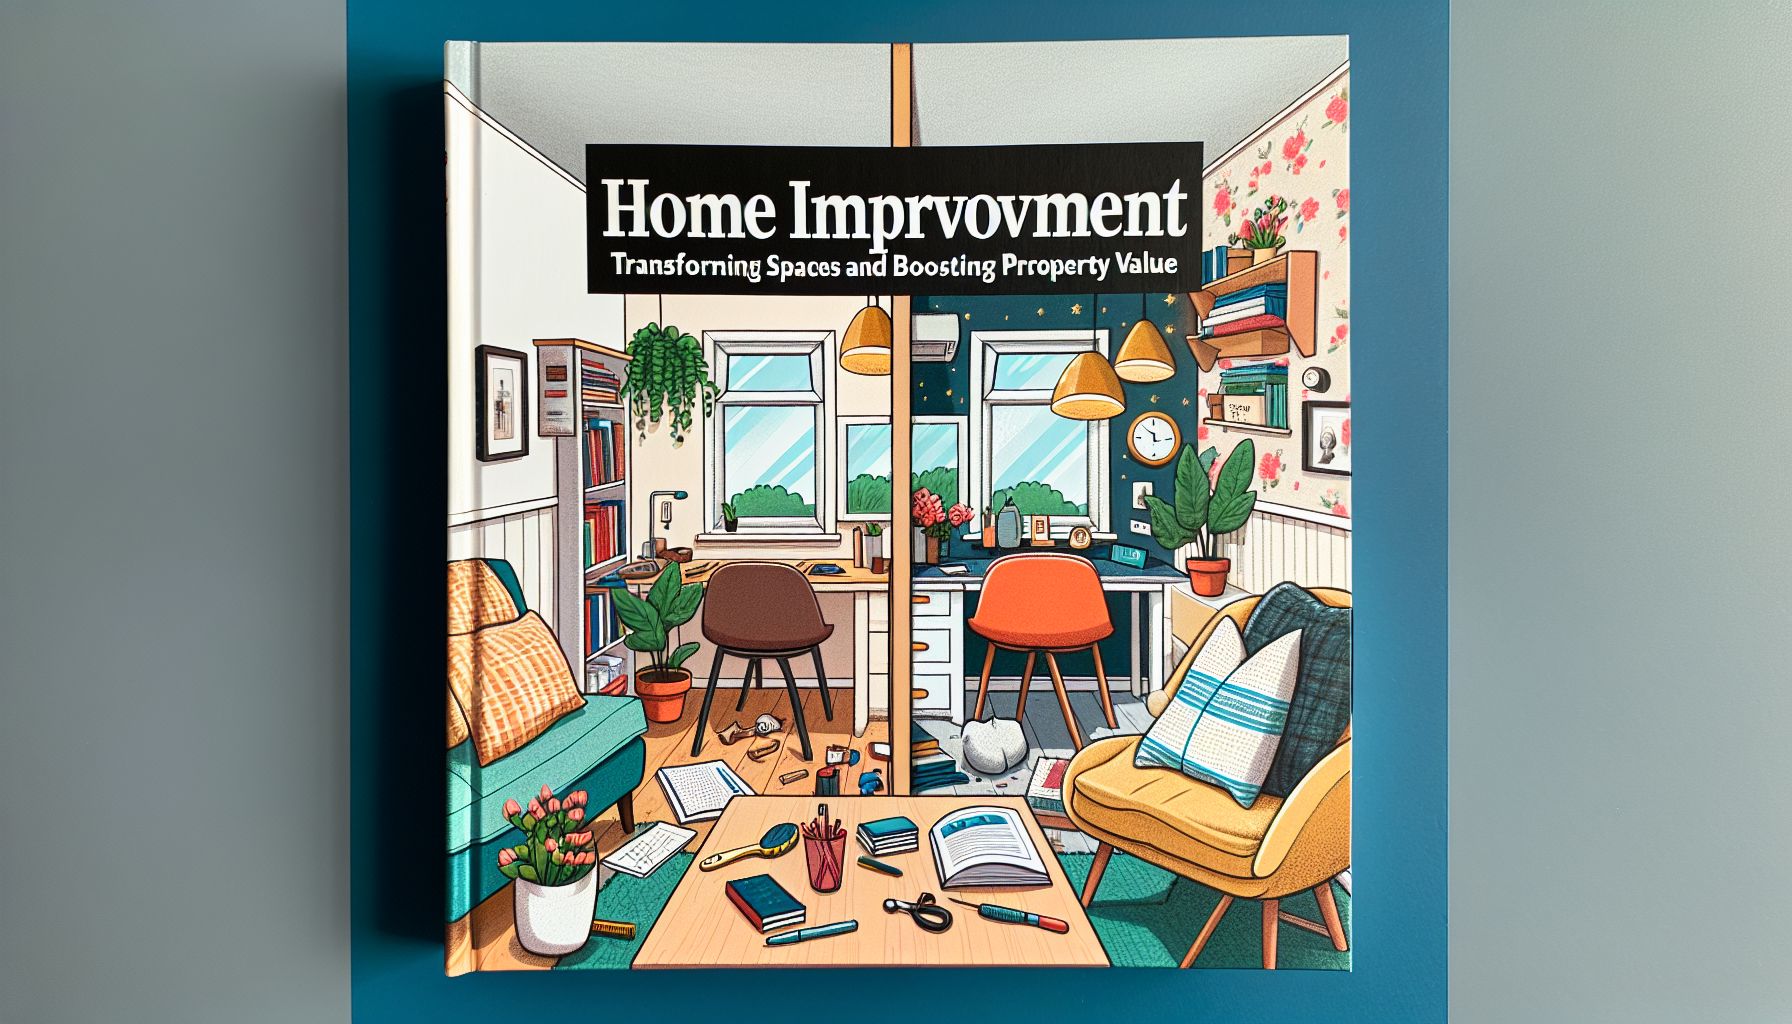 Home Improvement: Transforming Spaces and Boosting Property Value